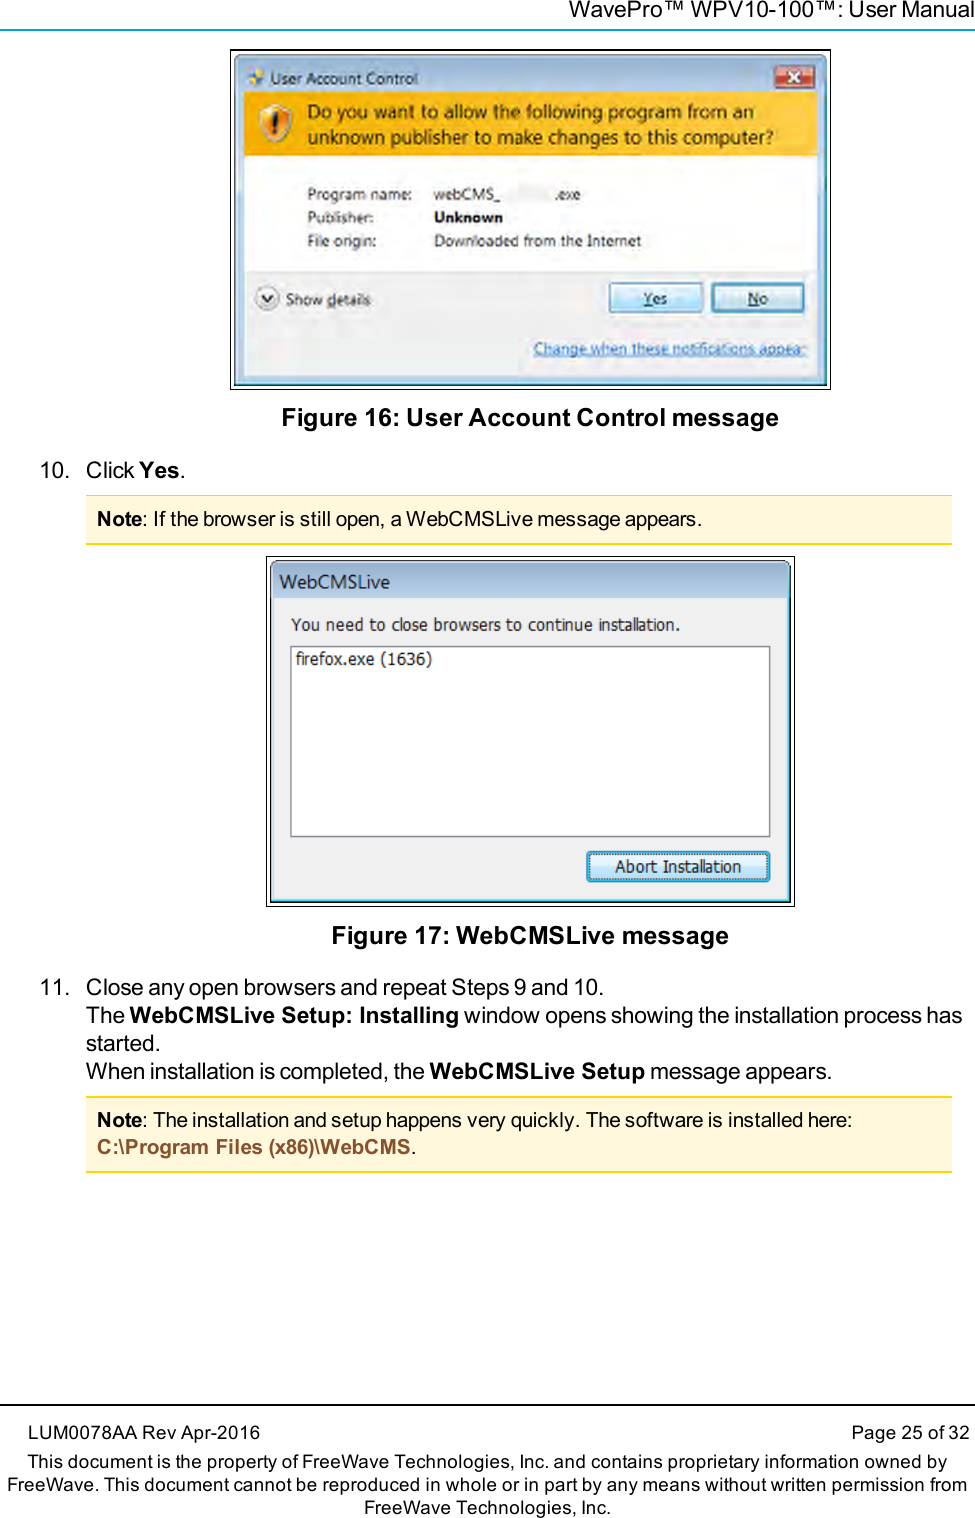 WavePro™ WPV10-100™: User ManualFigure 16: User Account Control message10. Click Yes.Note: If the browser is still open, a WebCMSLive message appears.Figure 17: WebCMSLive message11. Close any open browsers and repeat Steps 9 and 10.The WebCMSLive Setup: Installing window opens showing the installation process hasstarted.When installation is completed, the WebCMSLive Setup message appears.Note: The installation and setup happens very quickly. The software is installed here:C:\Program Files (x86)\WebCMS.LUM0078AA Rev Apr-2016 Page 25 of 32This document is the property of FreeWave Technologies, Inc. and contains proprietary information owned byFreeWave. This document cannot be reproduced in whole or in part by any means without written permission fromFreeWave Technologies, Inc.